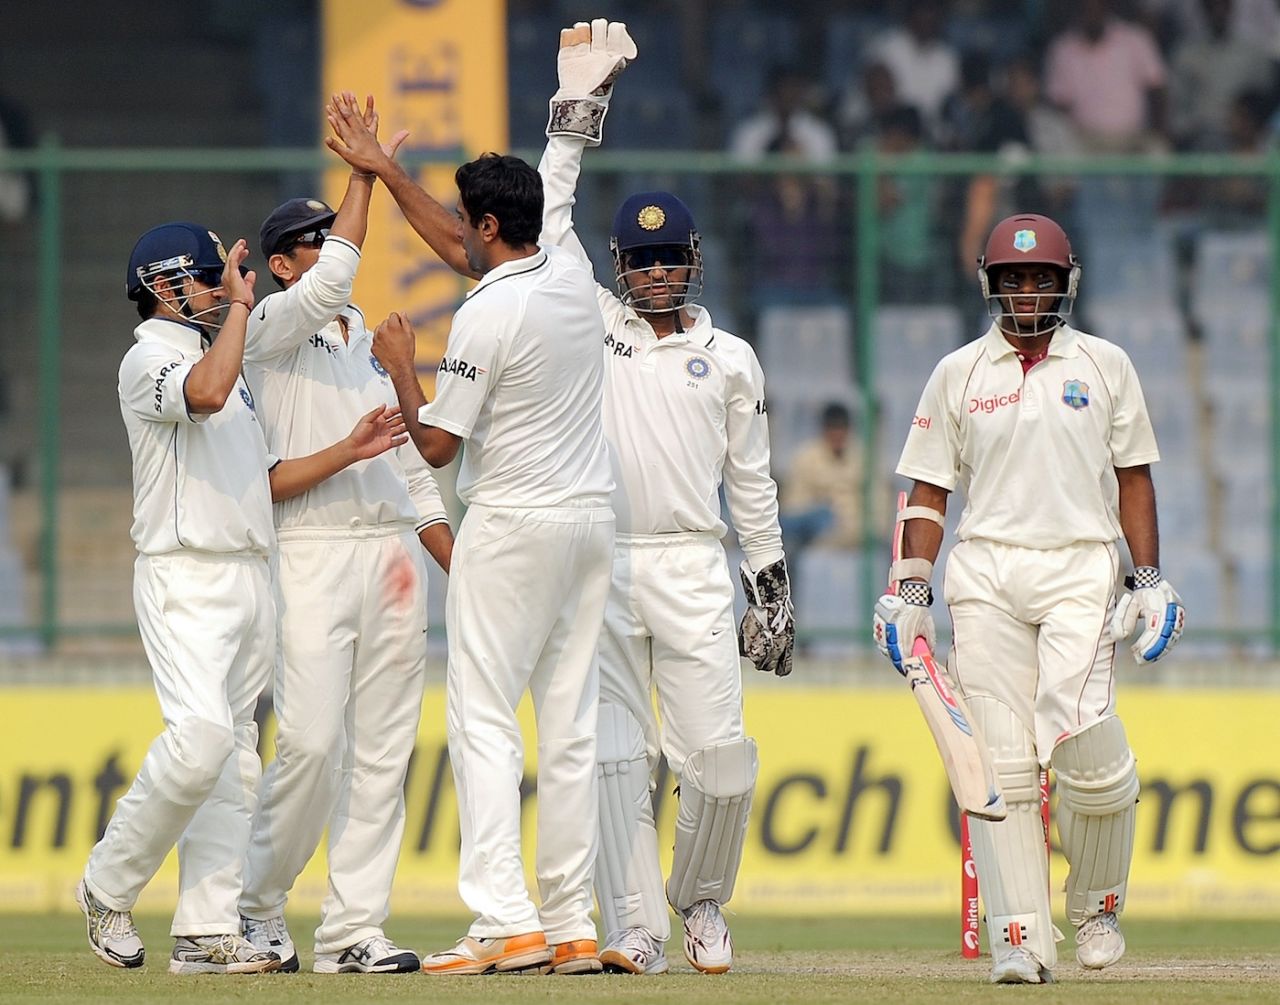 R Ashwin celebrates with his teammates after taking the wicket of Shivnarine Chanderpaul, India vs West Indies, 1st Test, Delhi, 3rd day, November 8, 2011